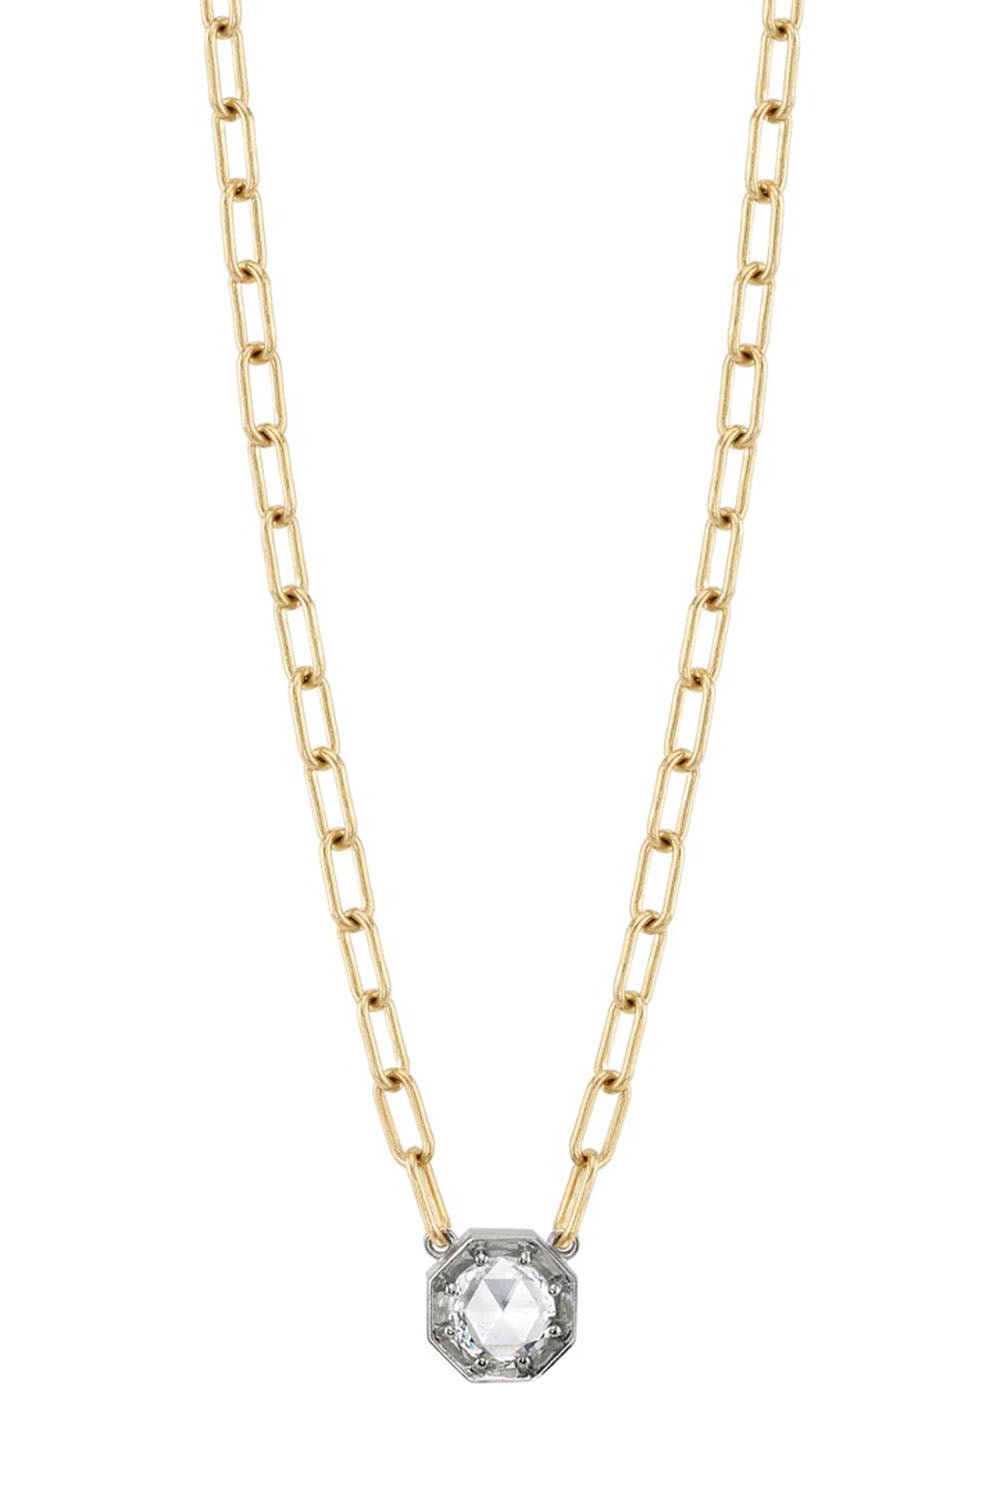 SINGLE STONE-Summer Necklace-YELLOW GOLD